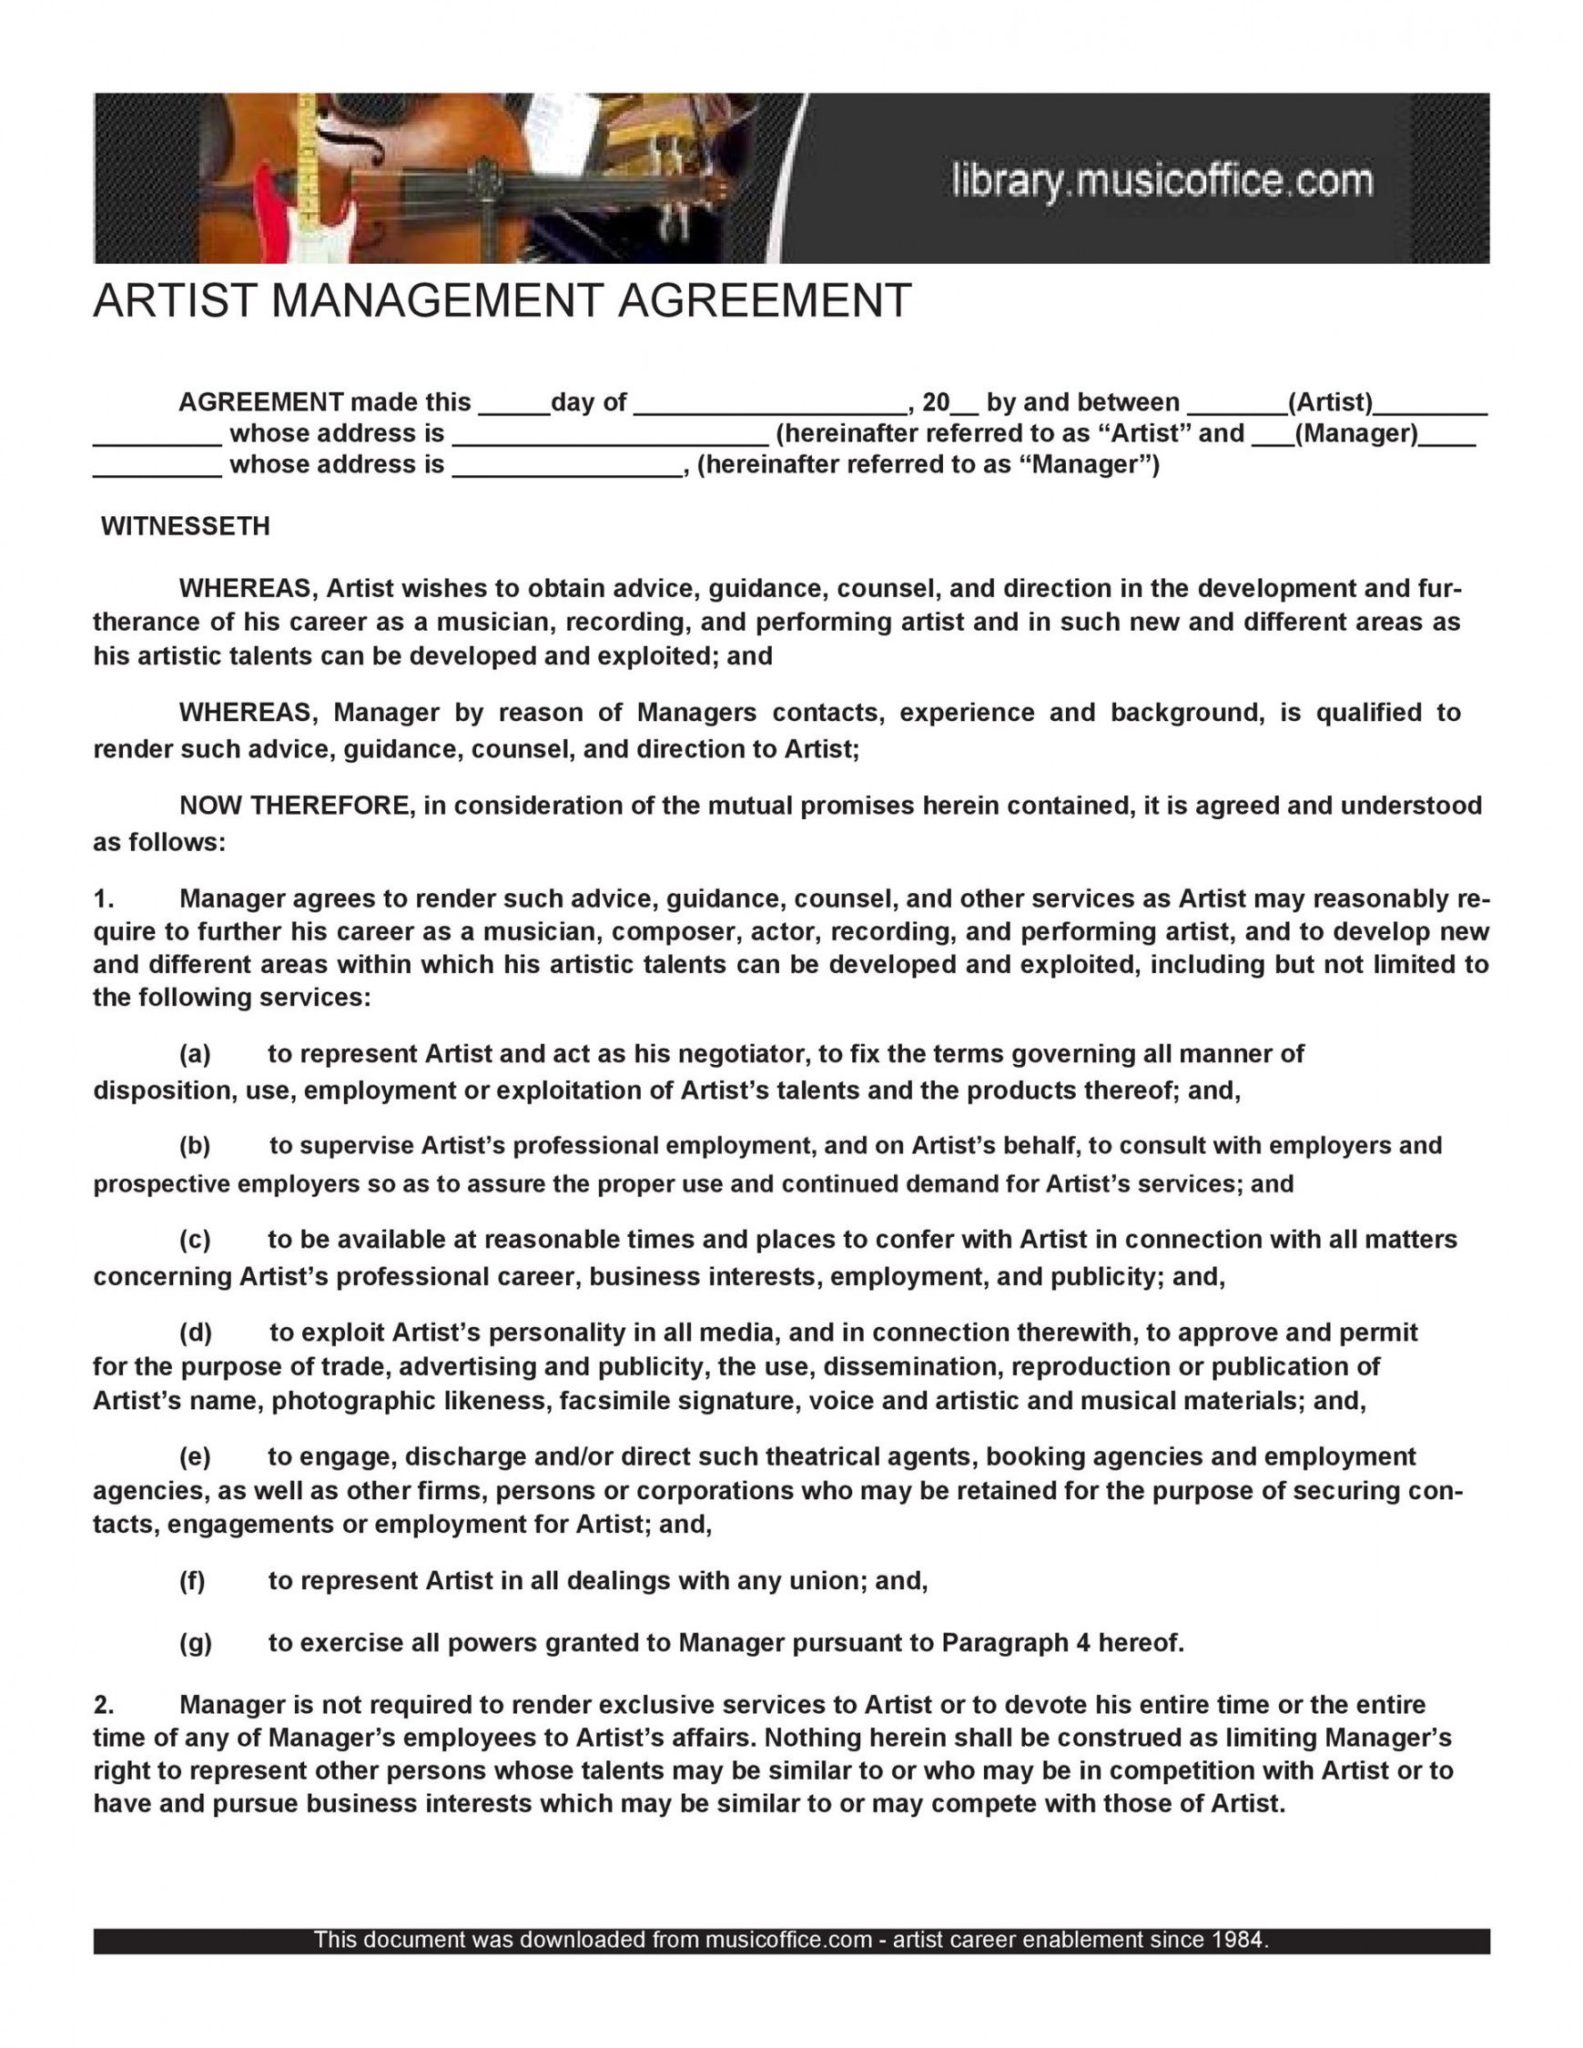 free-50-artist-management-contract-templates-ms-word-templatelab-music